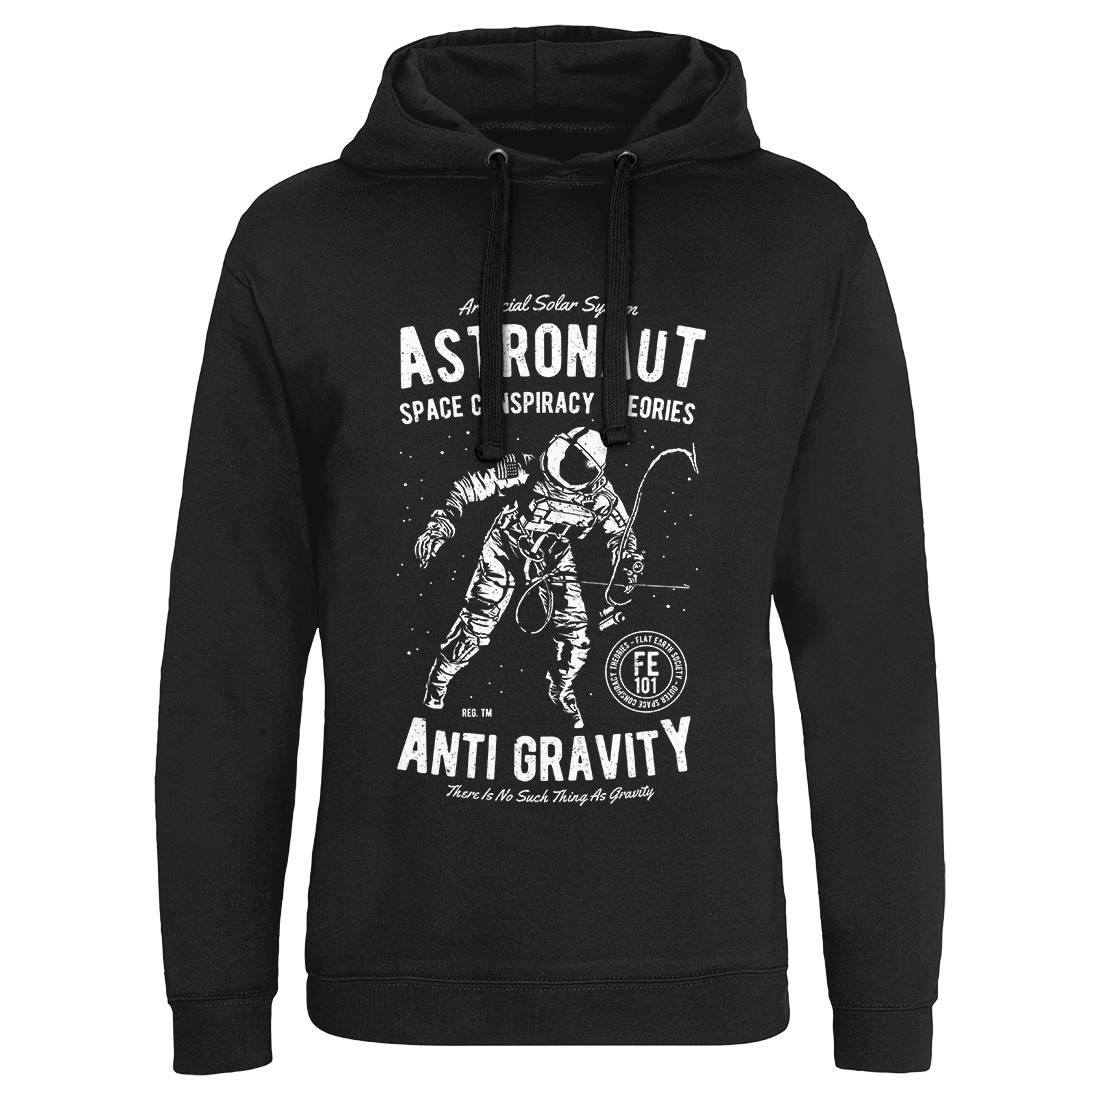 Conspiracy Theories Mens Hoodie Without Pocket Space A759